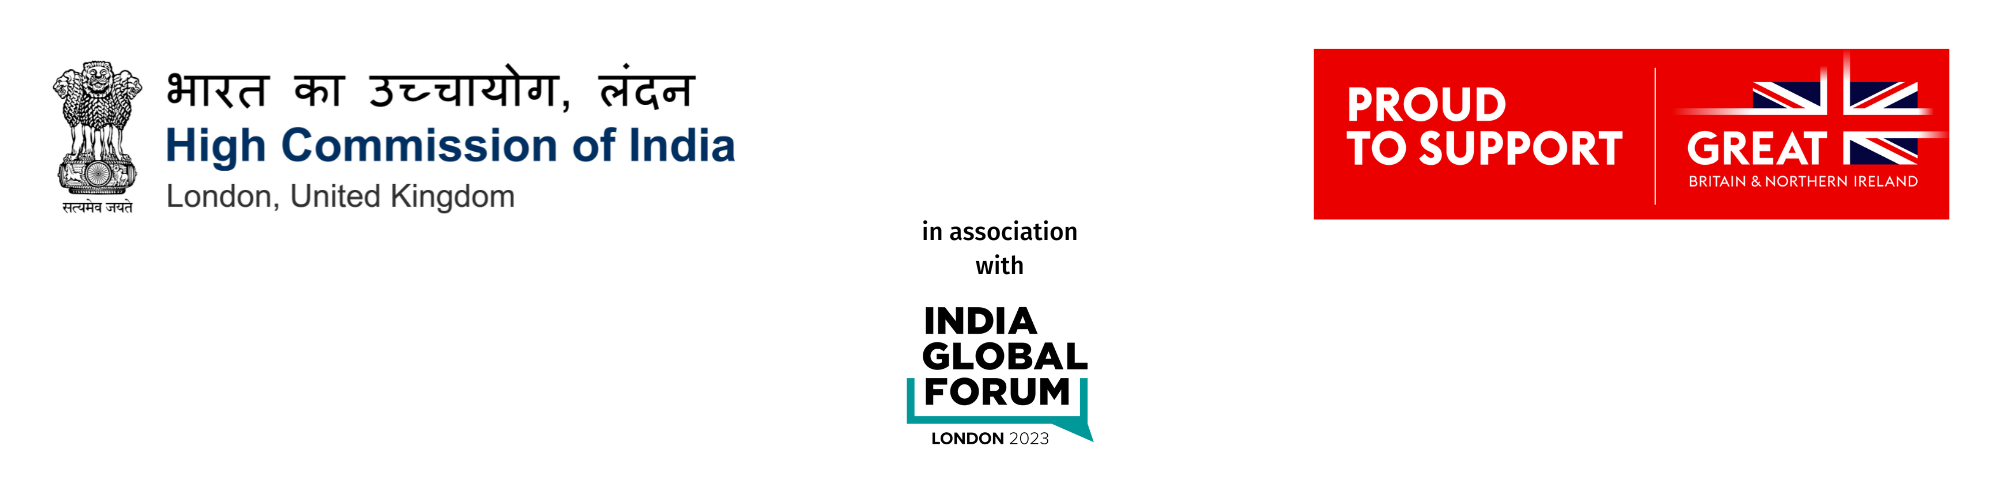 The logos of the High Commission of India, The Great, and the India Global Forum